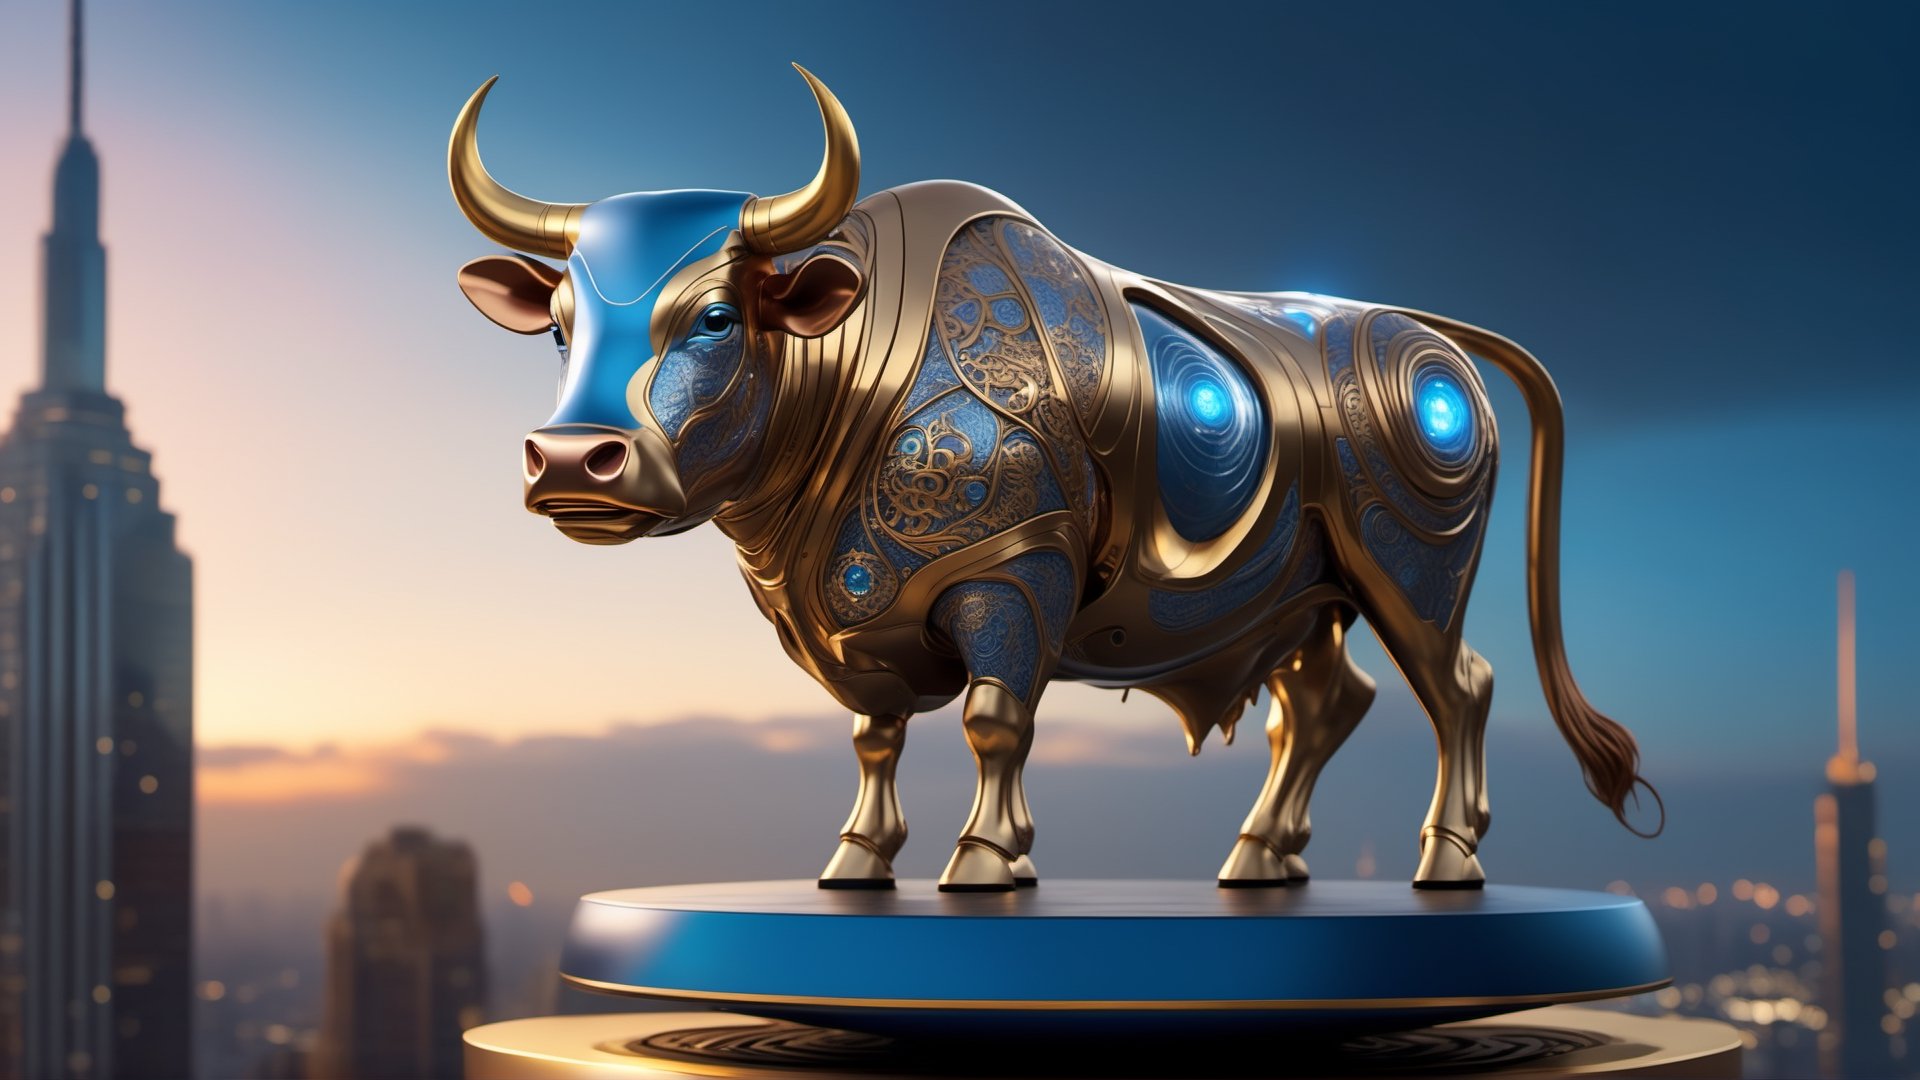 A cow and calf made for Ironman on the rooftop on a golden platform, shiny metal look, insane detail, highly detailed, luxury, intricate carving, intricate lines, Zbrush, 3D, 8K (best quality:1.33), futuristic skyscrapers in the background, full body in sharp focus, stars, night sky, cinematic lighting, blue orb-like moon in the background, SteelHeartQuiron character